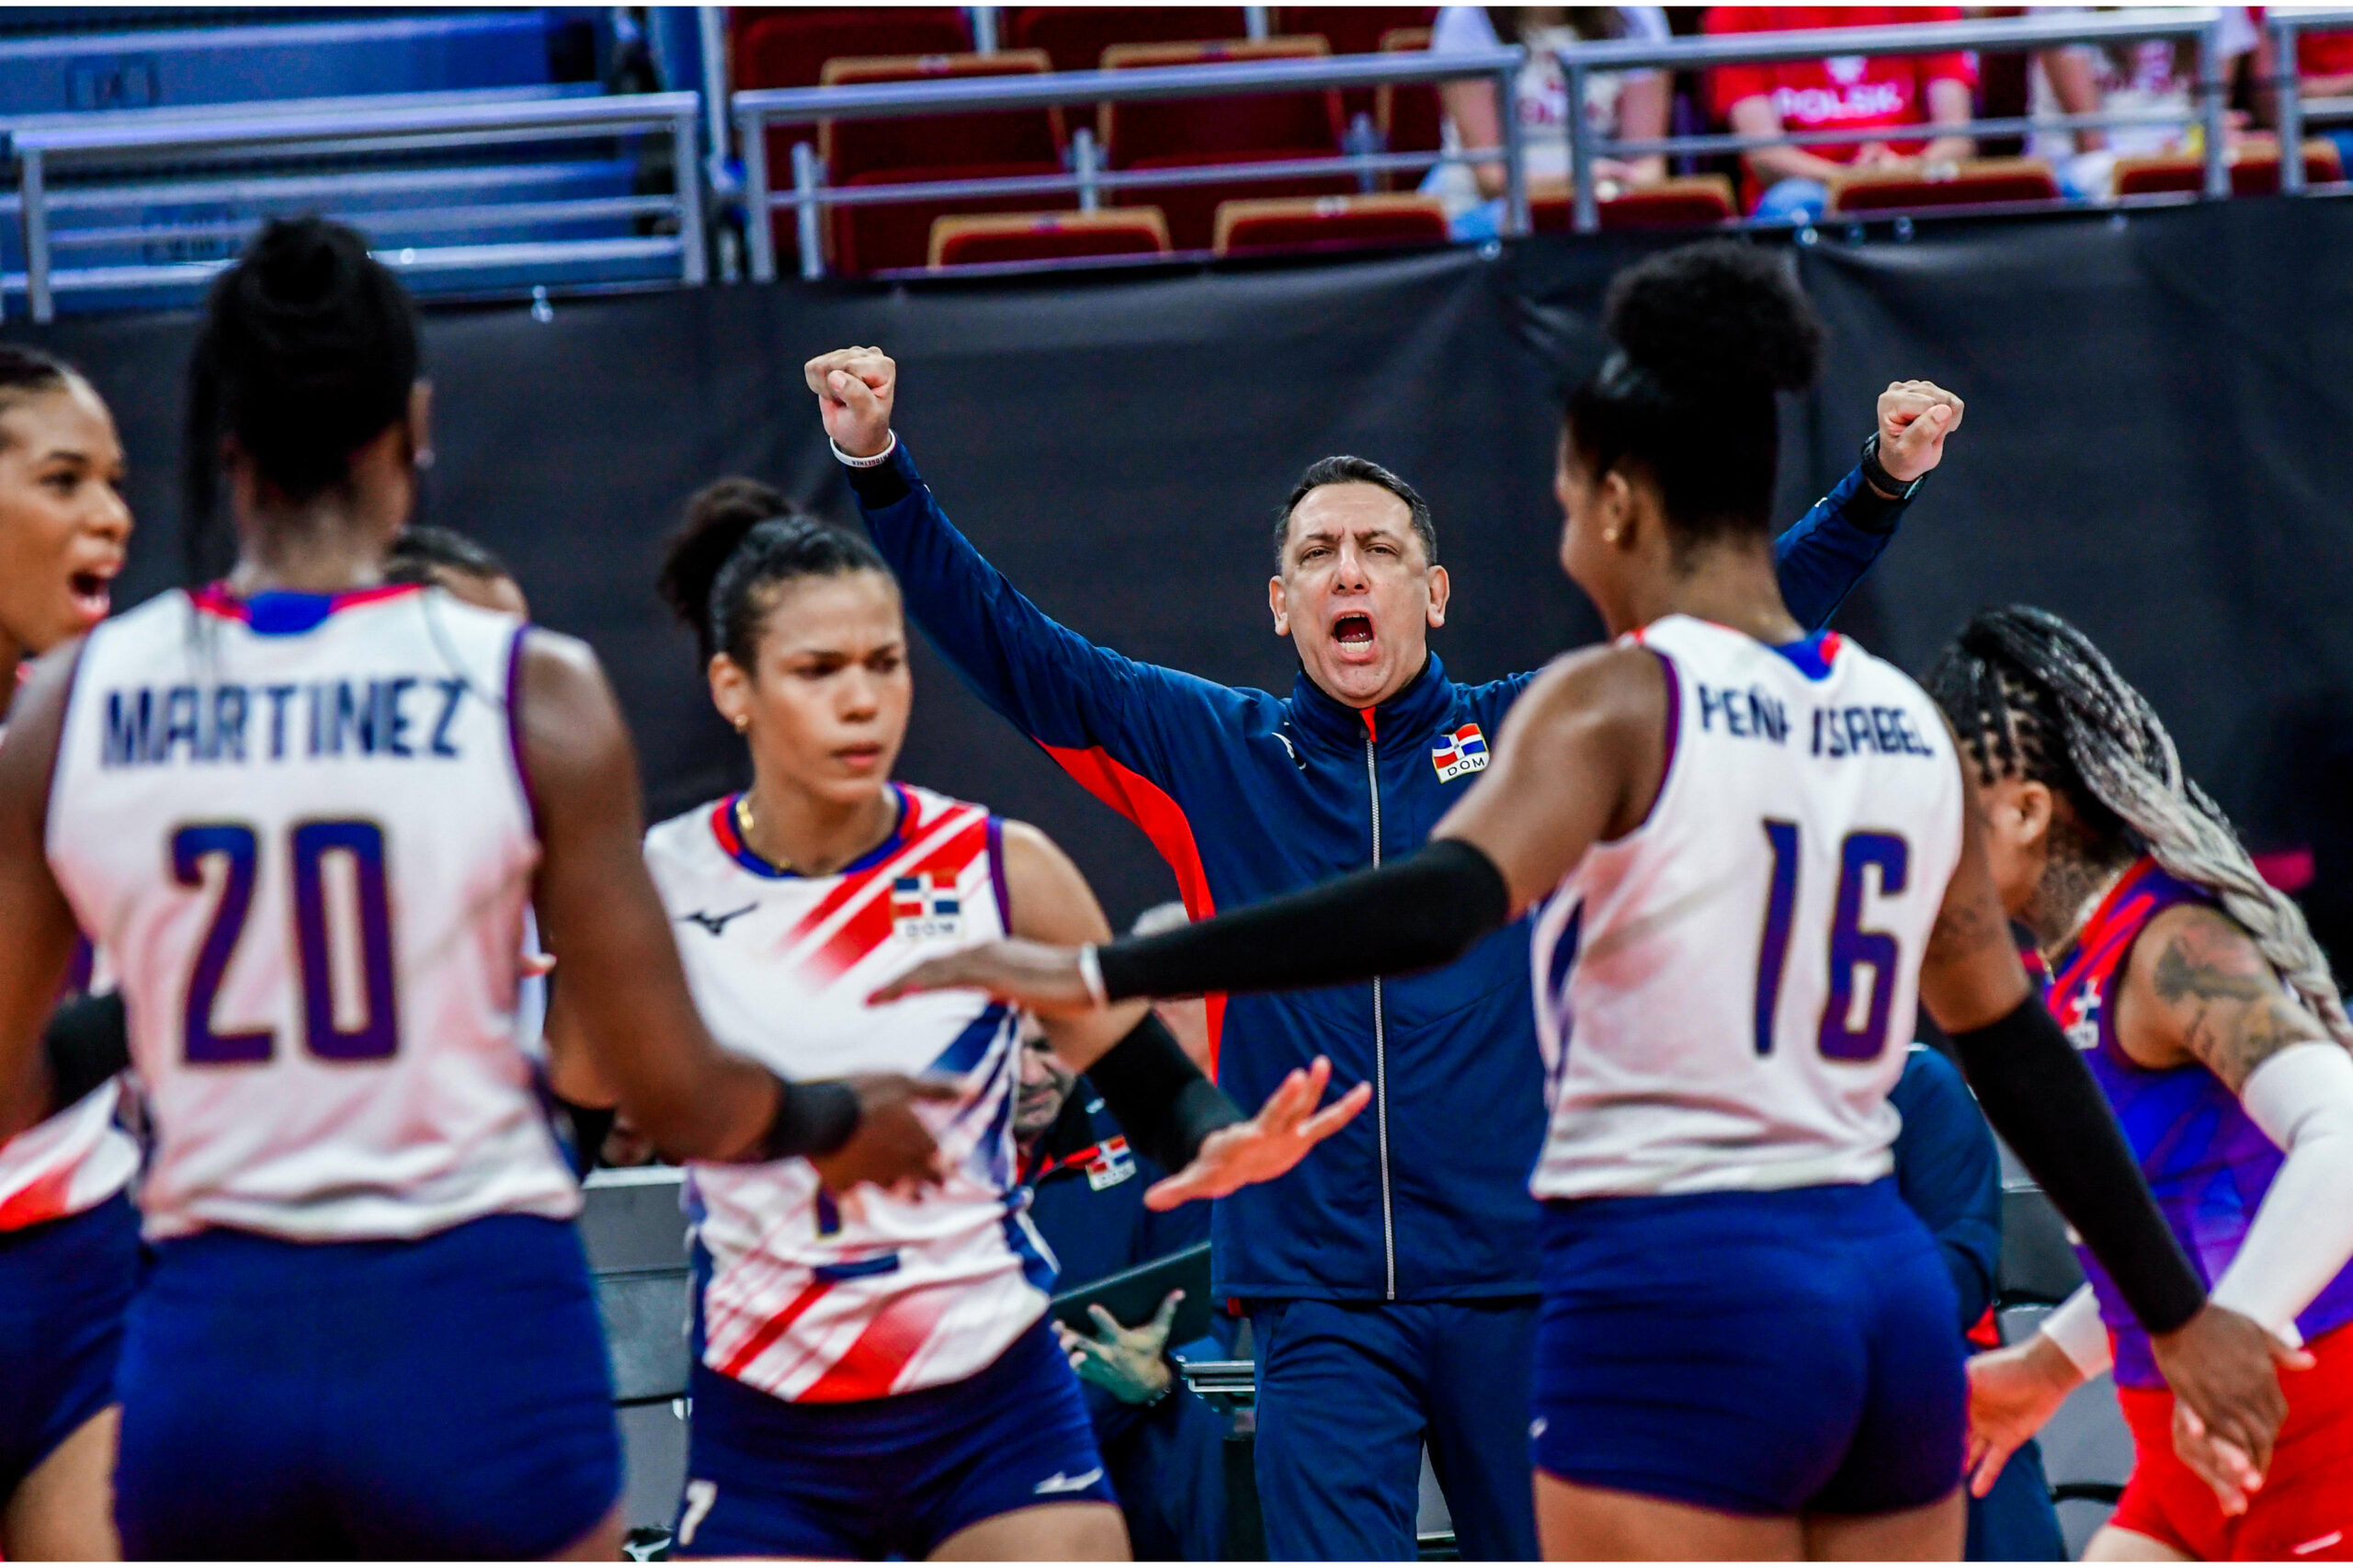 Dominican Republic obtains second victory in the World Championship